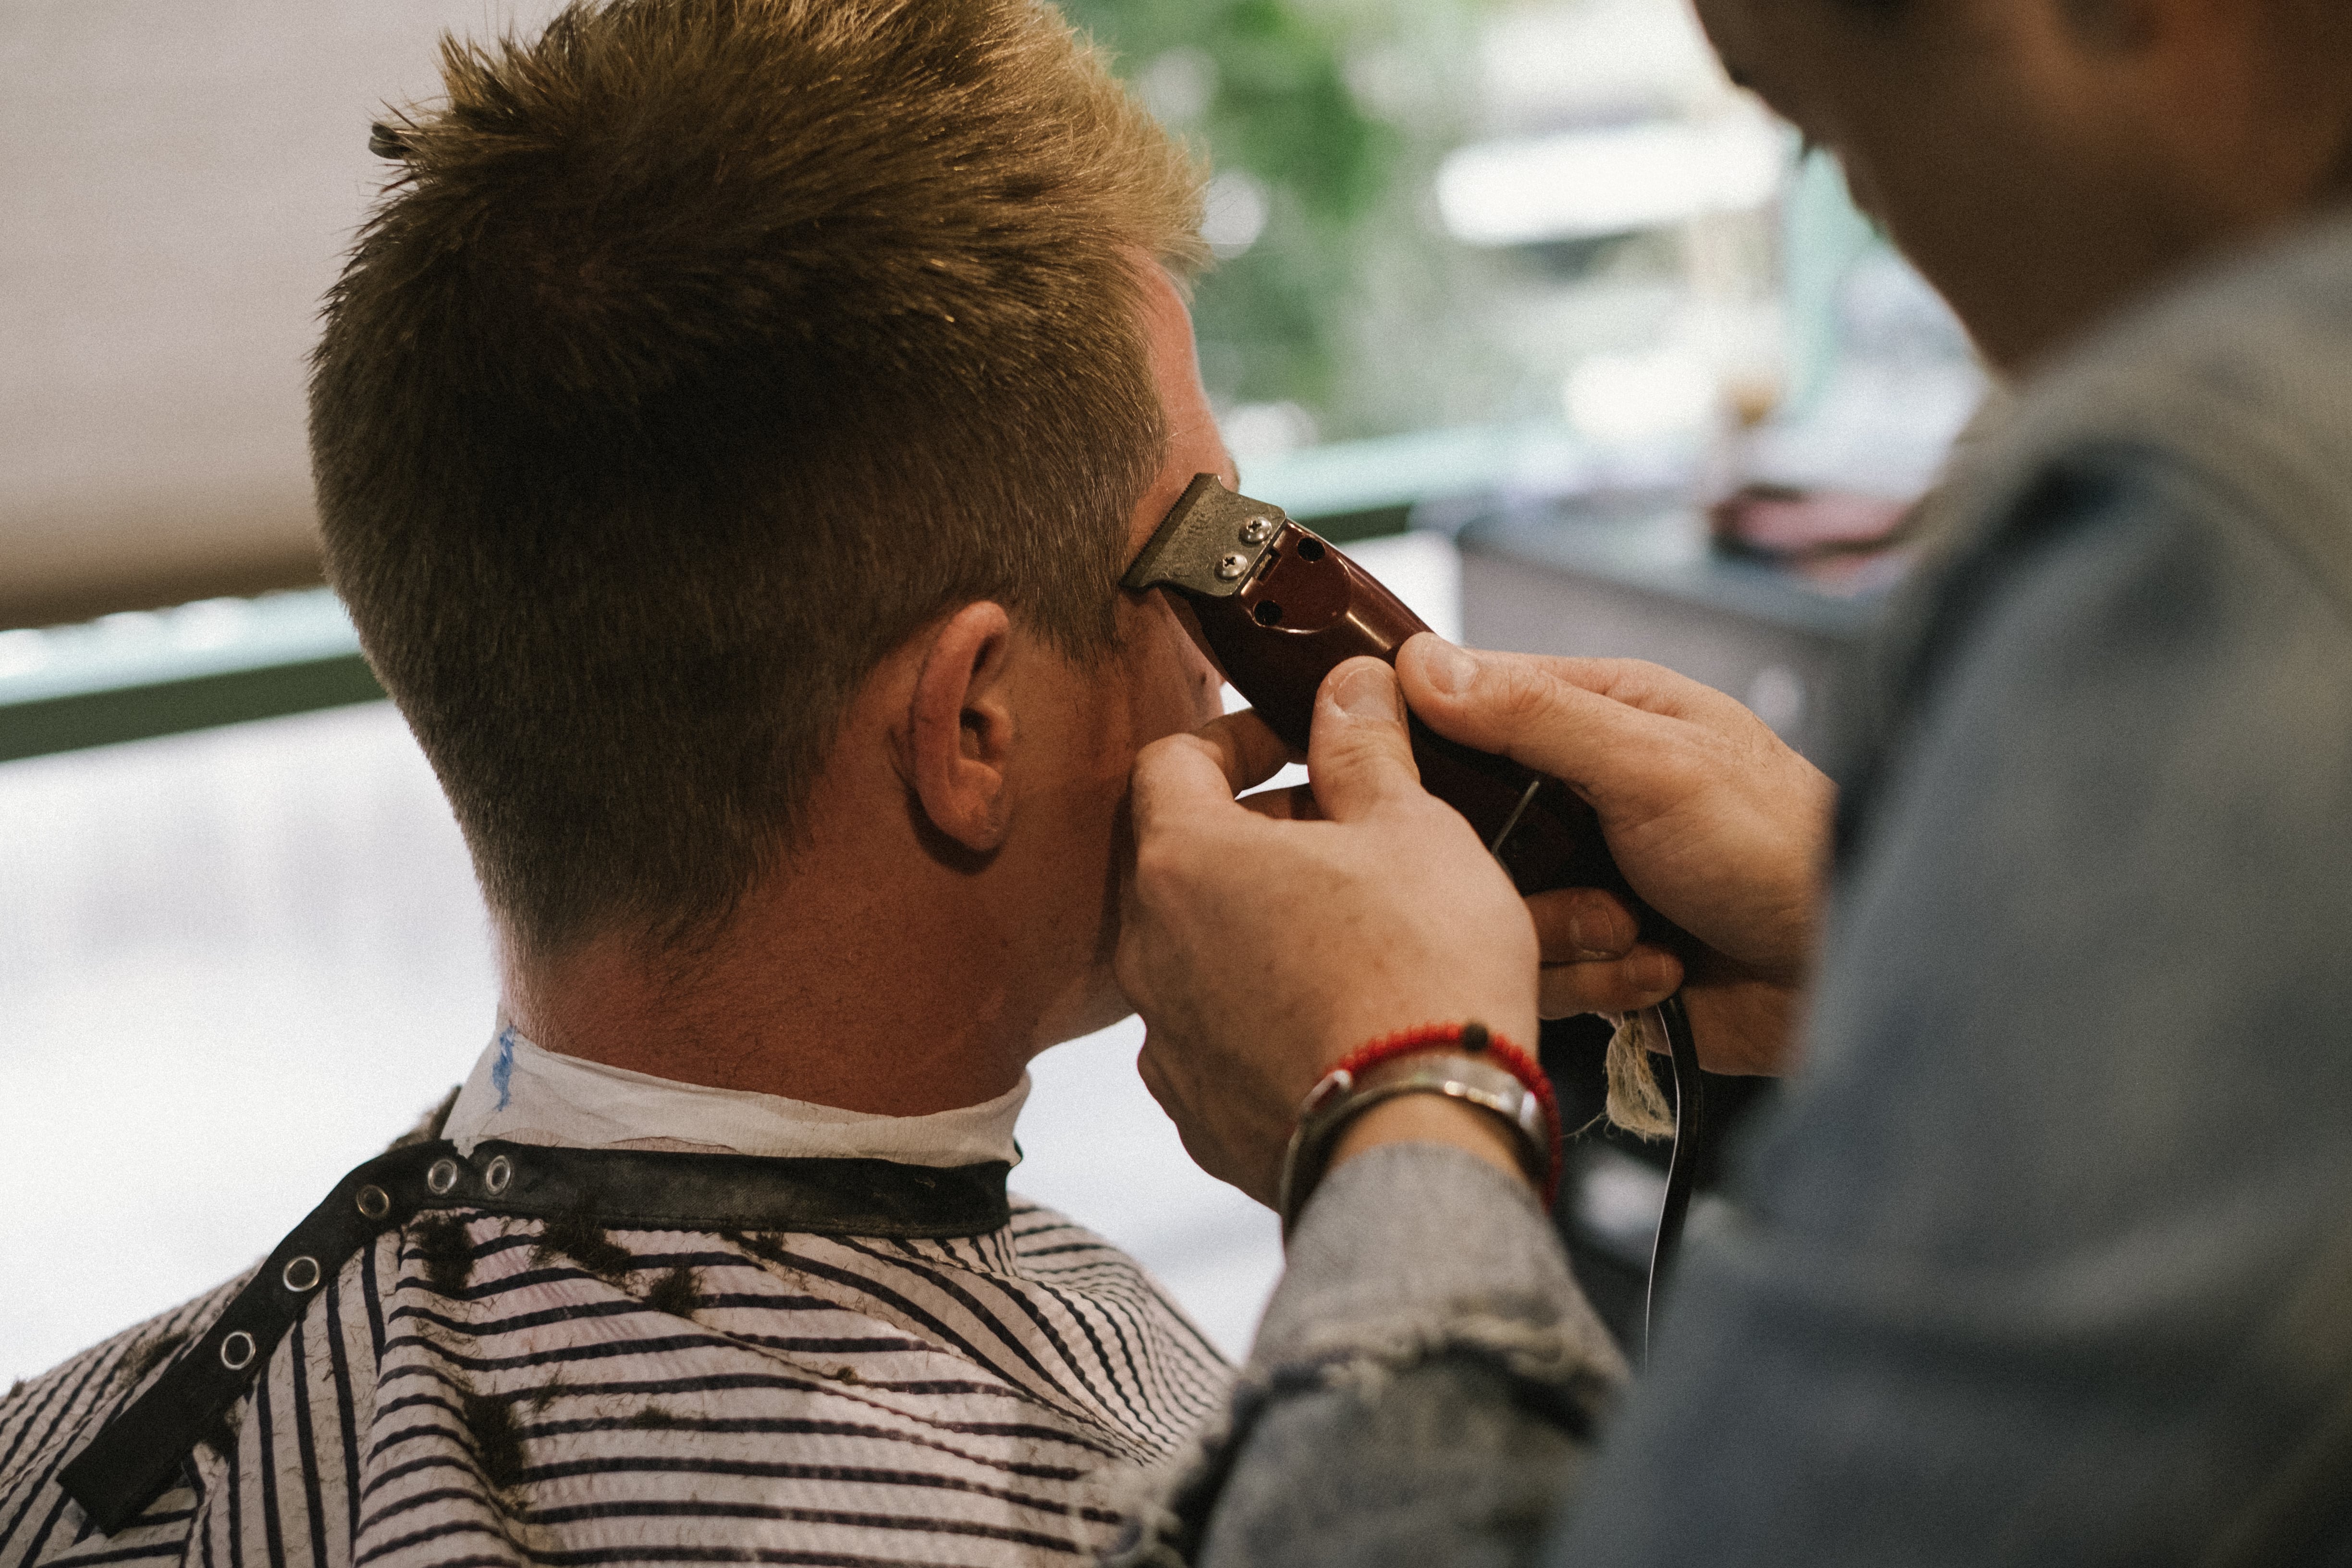 fifty-two-barbers-image